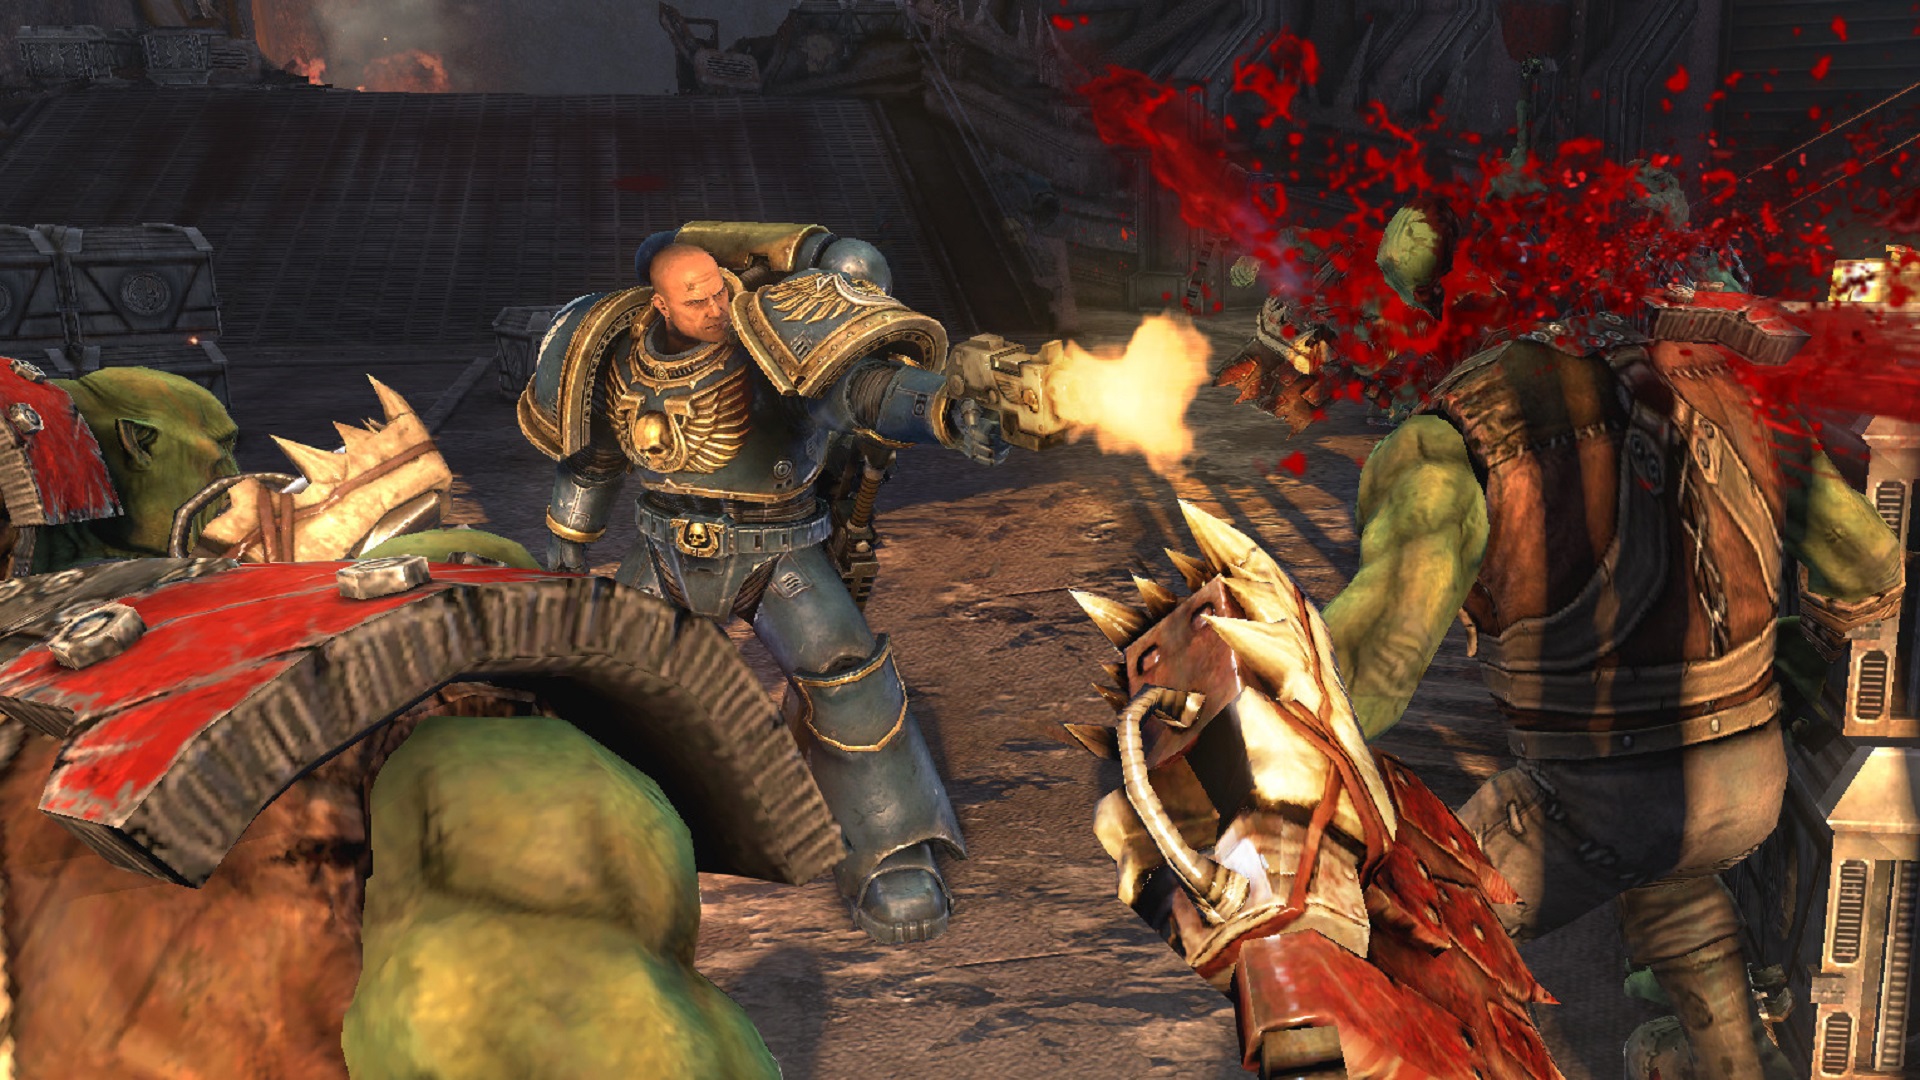 A 40K space marine fires at a couple of orks charging him in Warhammer 40,000 game Space Marine